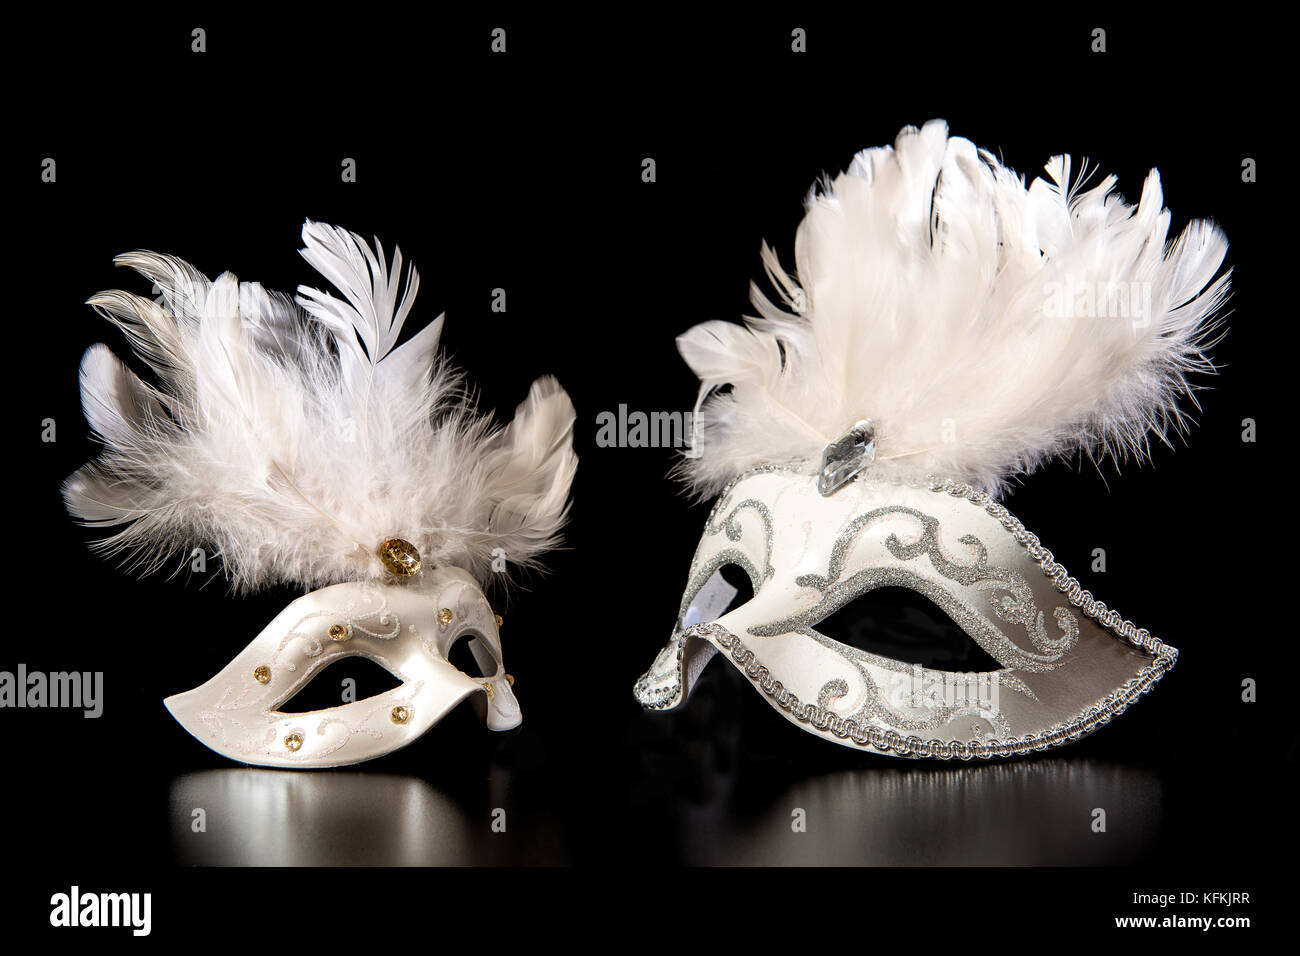 Pretty white venician golden carnival masks with feathers isolated on a mysterious black background Stock Photo